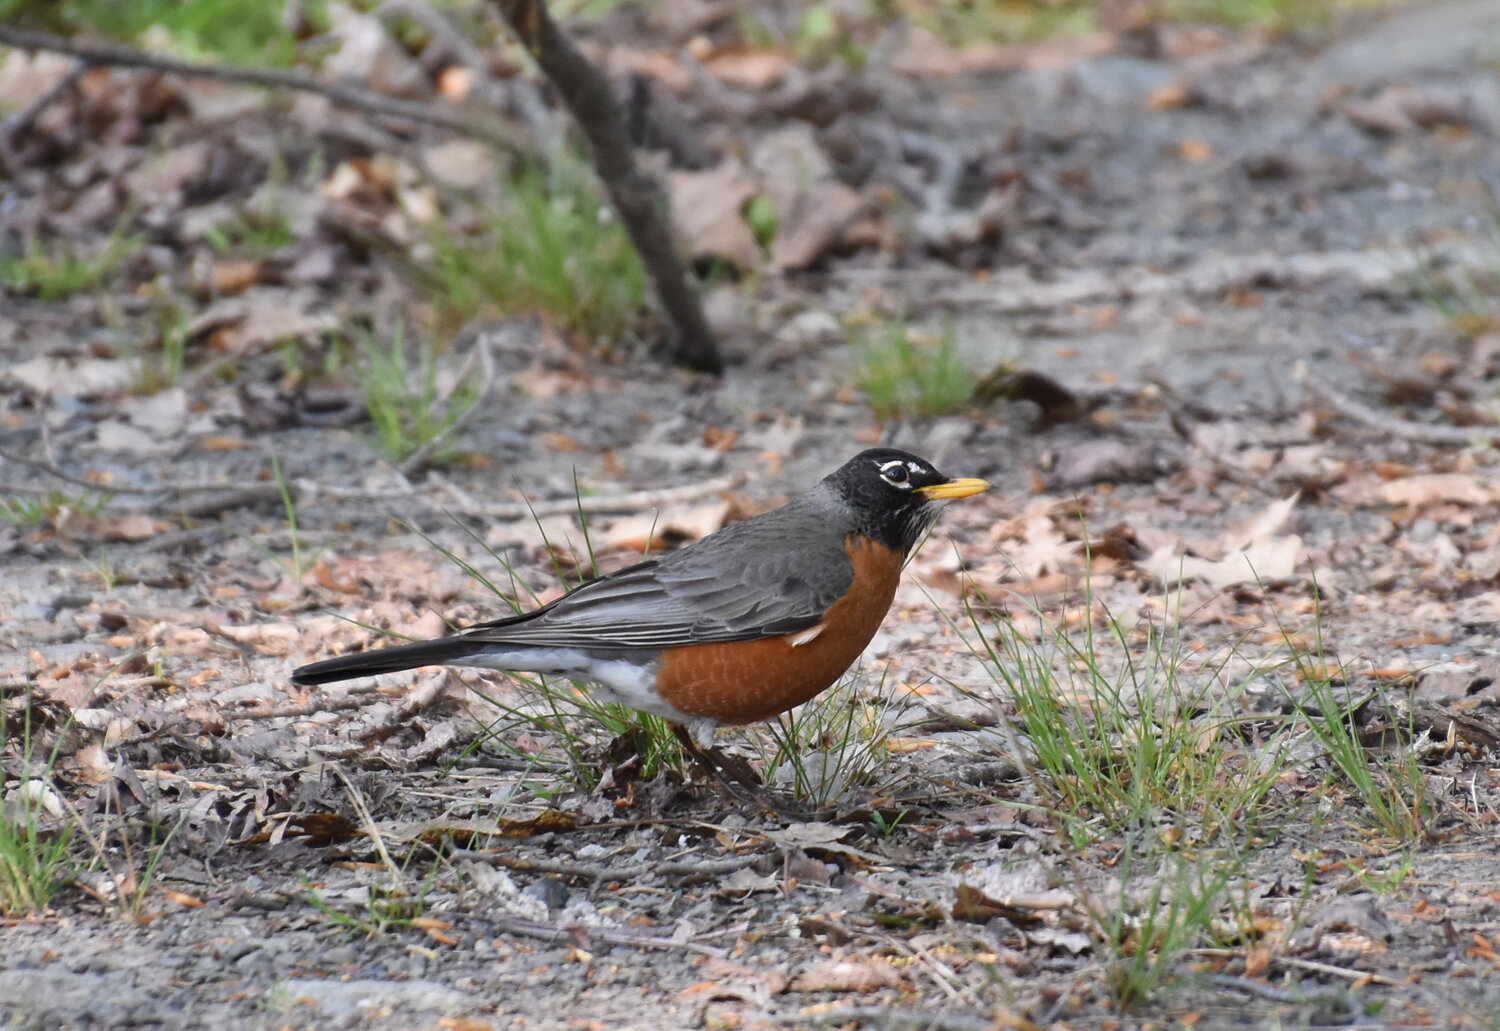 American robins are the largest North American thrushes, typically ranging from 8 to 10 inches long, with wingspans of approximately 12 to 16 inches. They are characterized by bright orange-red breasts topped with grayish-brown backs, gray wings, and dark gray heads. White eye rings and a white patch under the tail are other notable features of this beloved songbird...